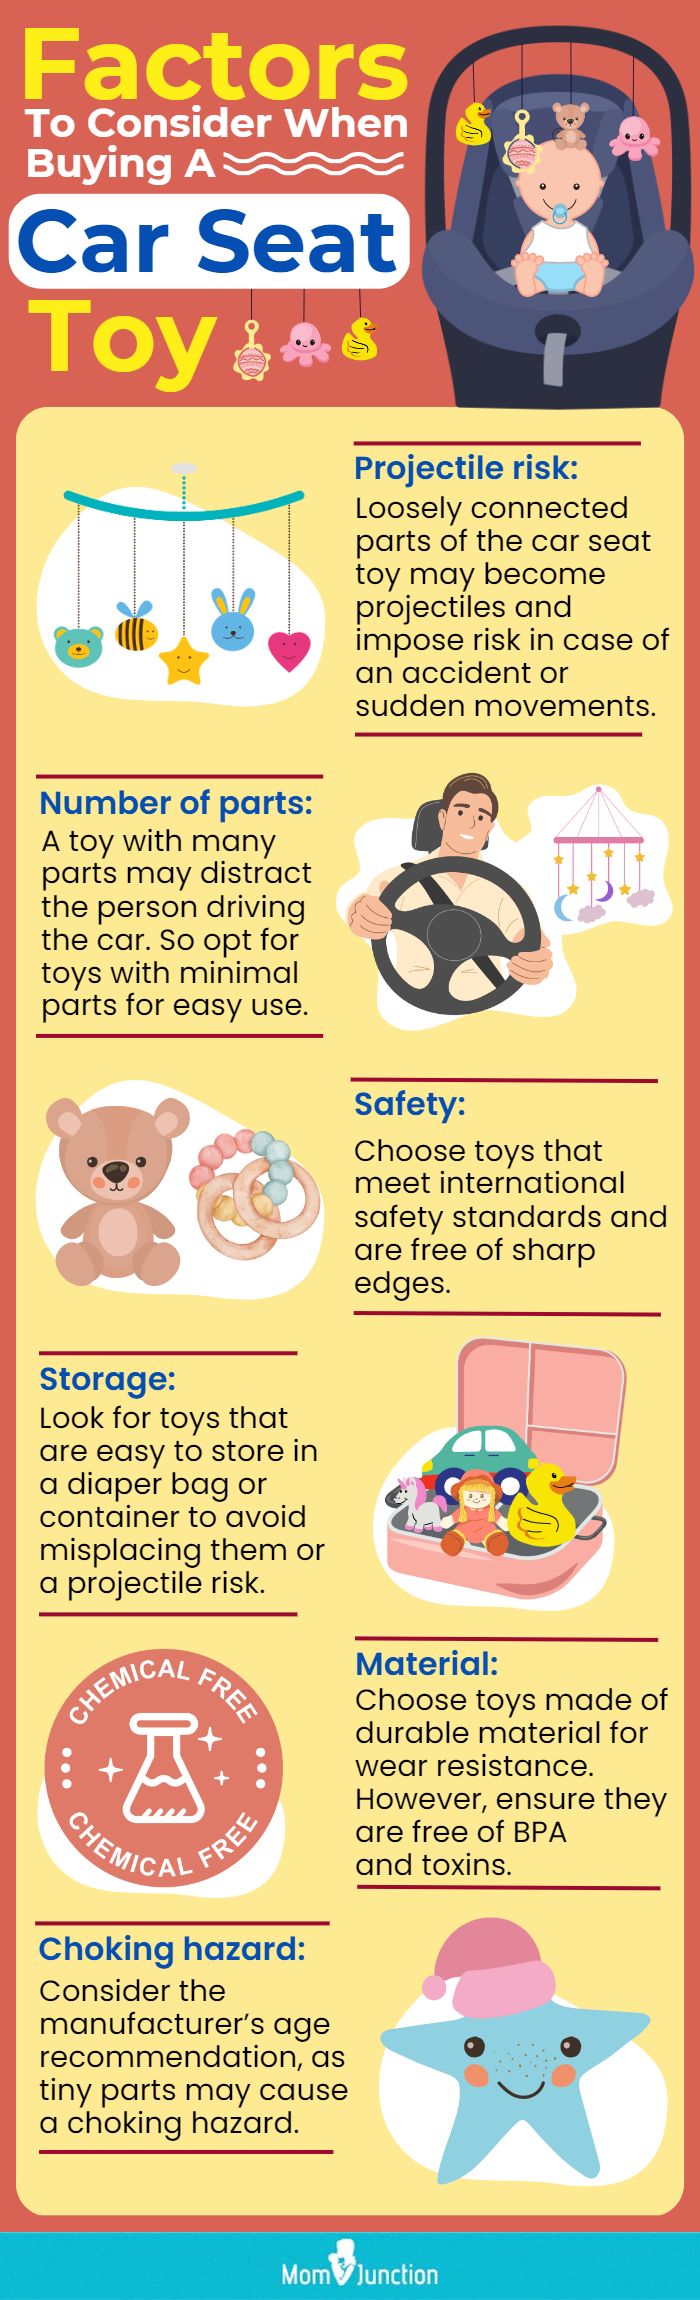 Factors To Consider When Buying A Car Seat Toy